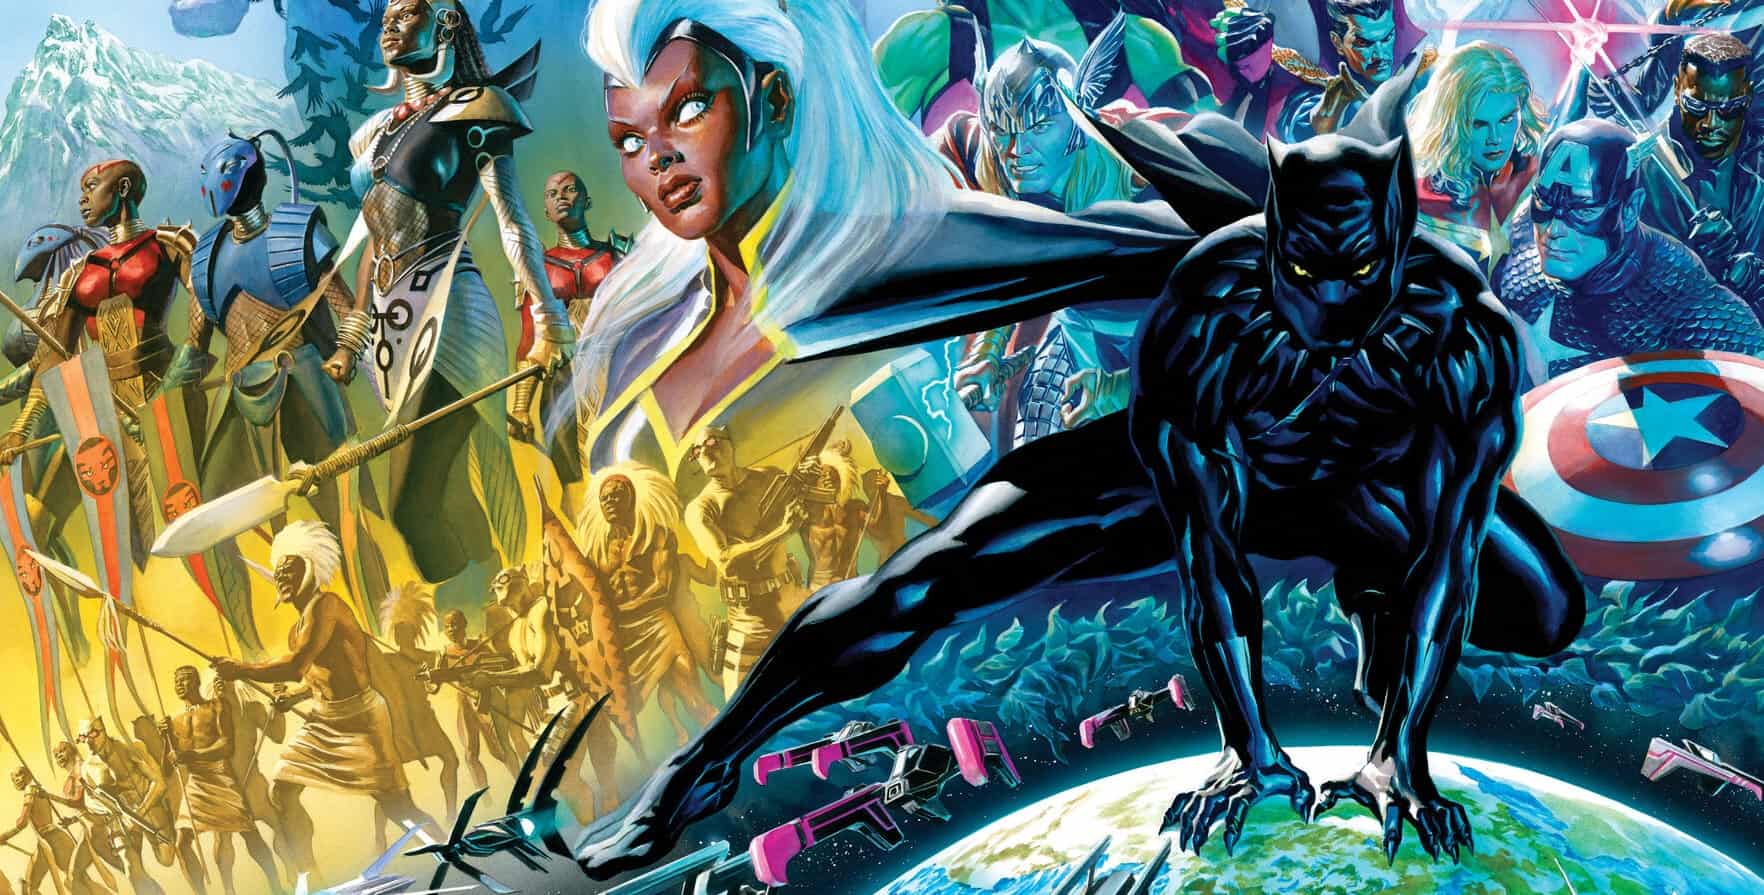 Black Superheroes Who Could Be The Next Black Panther